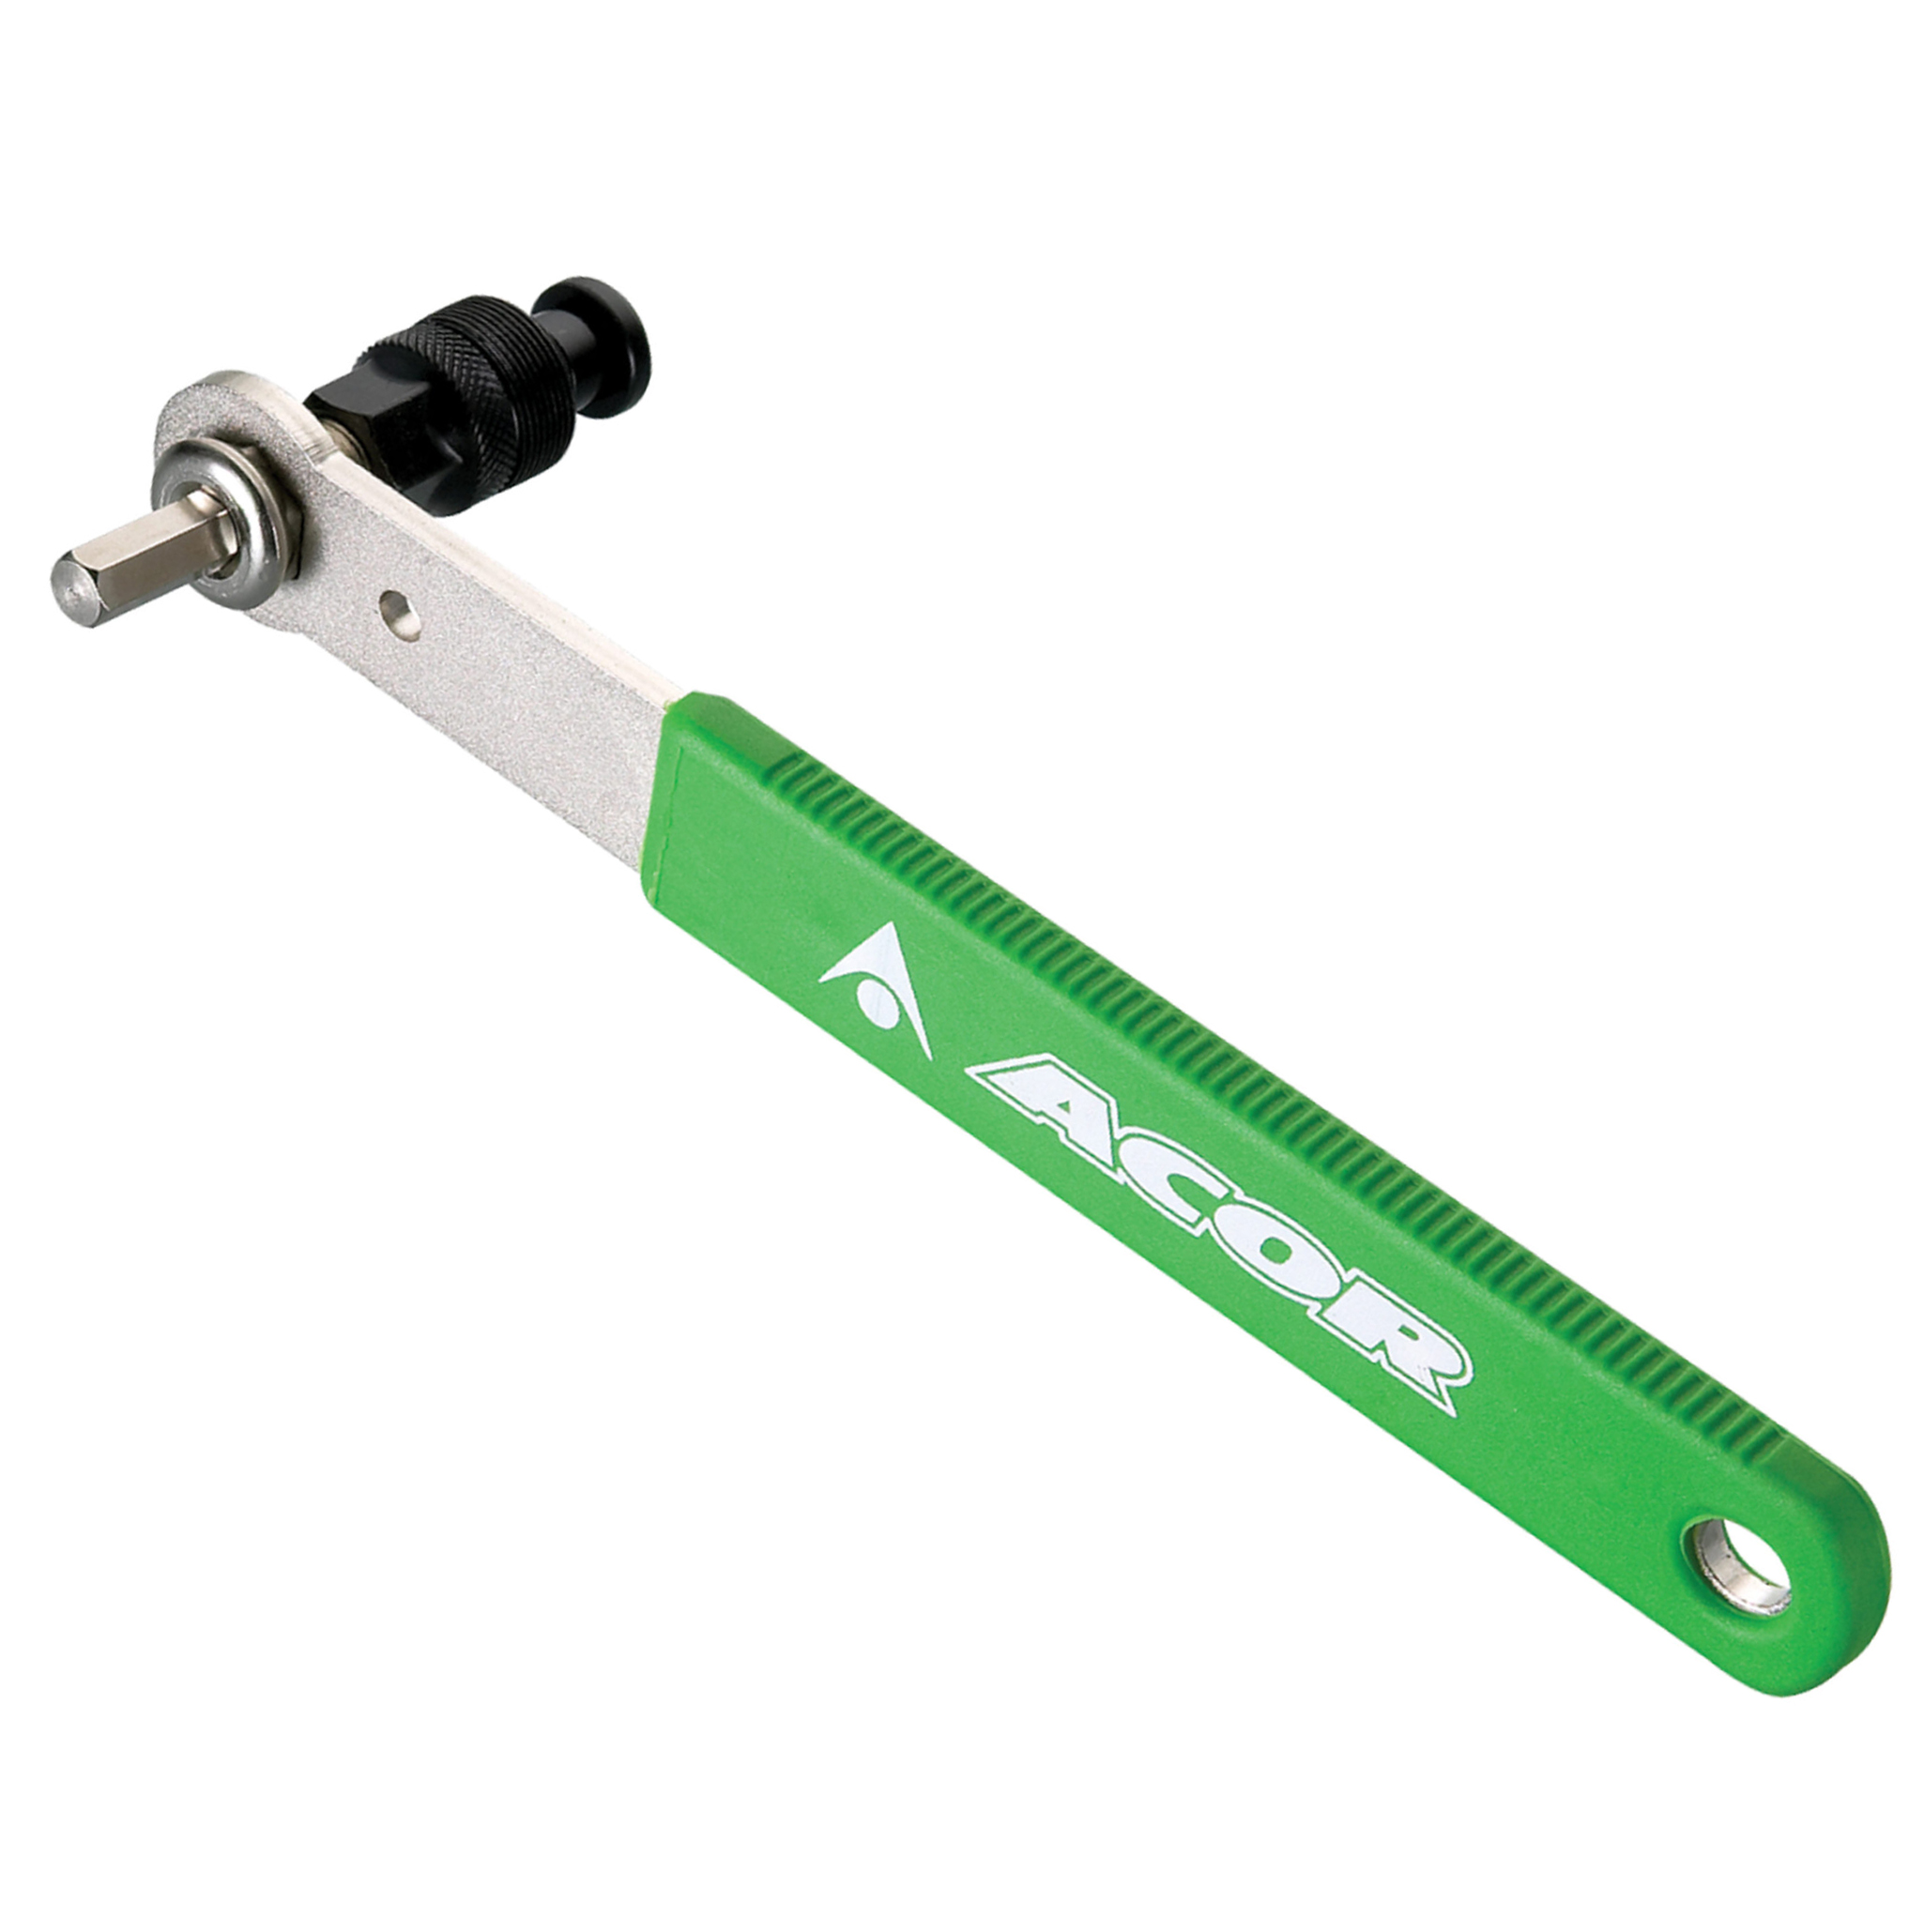 ATL2715G Acor Crank Remover Tool For Isis/Octalink